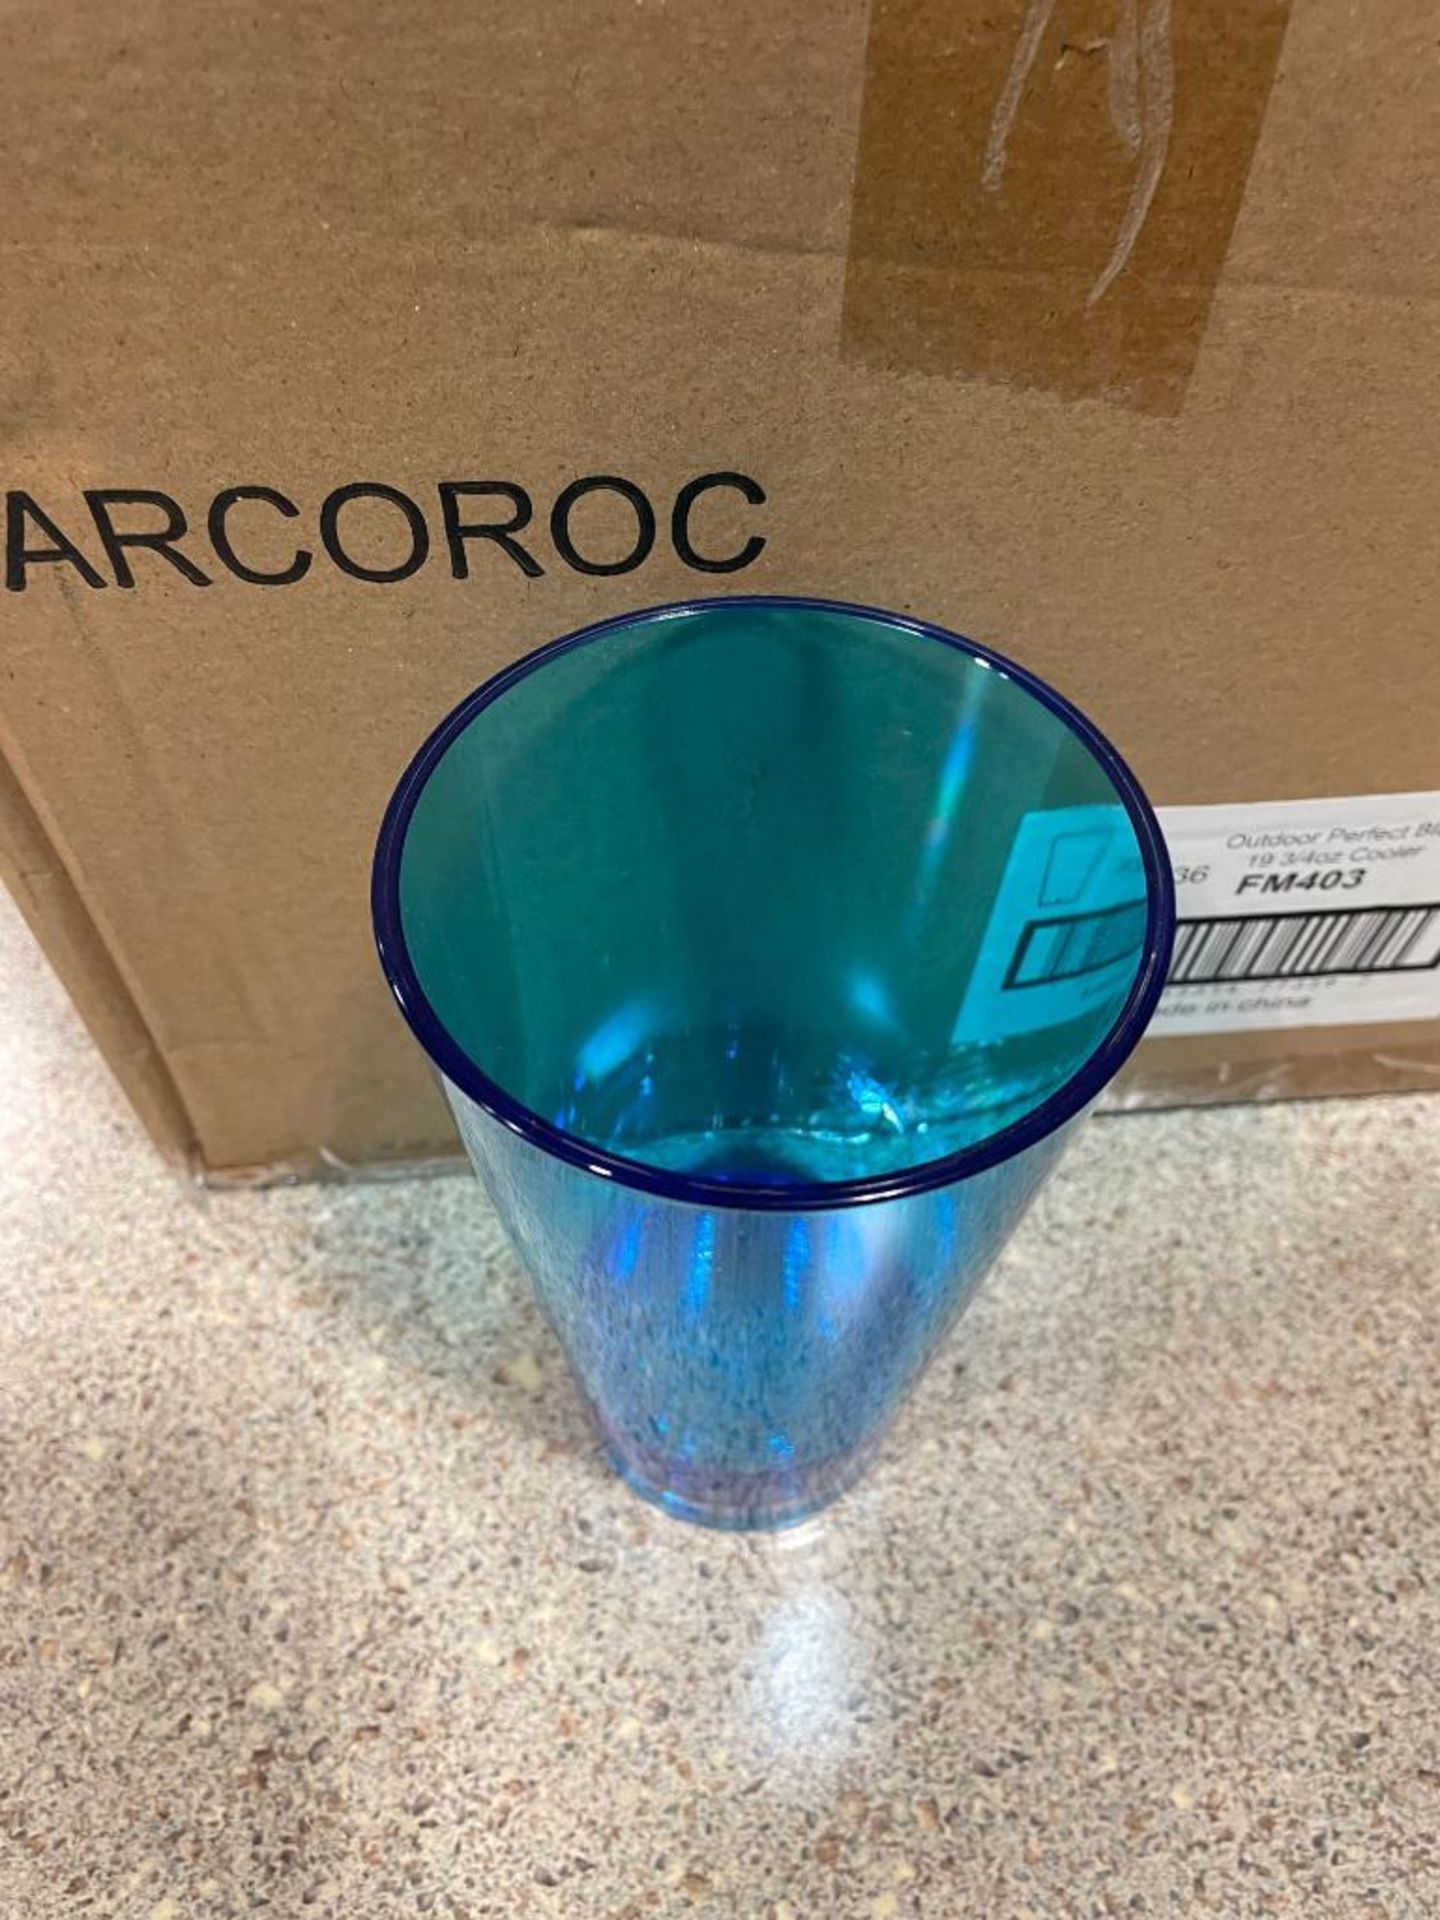 19.75OZ OUTDOOR PERFECT BLUE COOLER GLASSES, ARCOROC FM403 - LOT OF 36 - NEW - Image 8 of 10